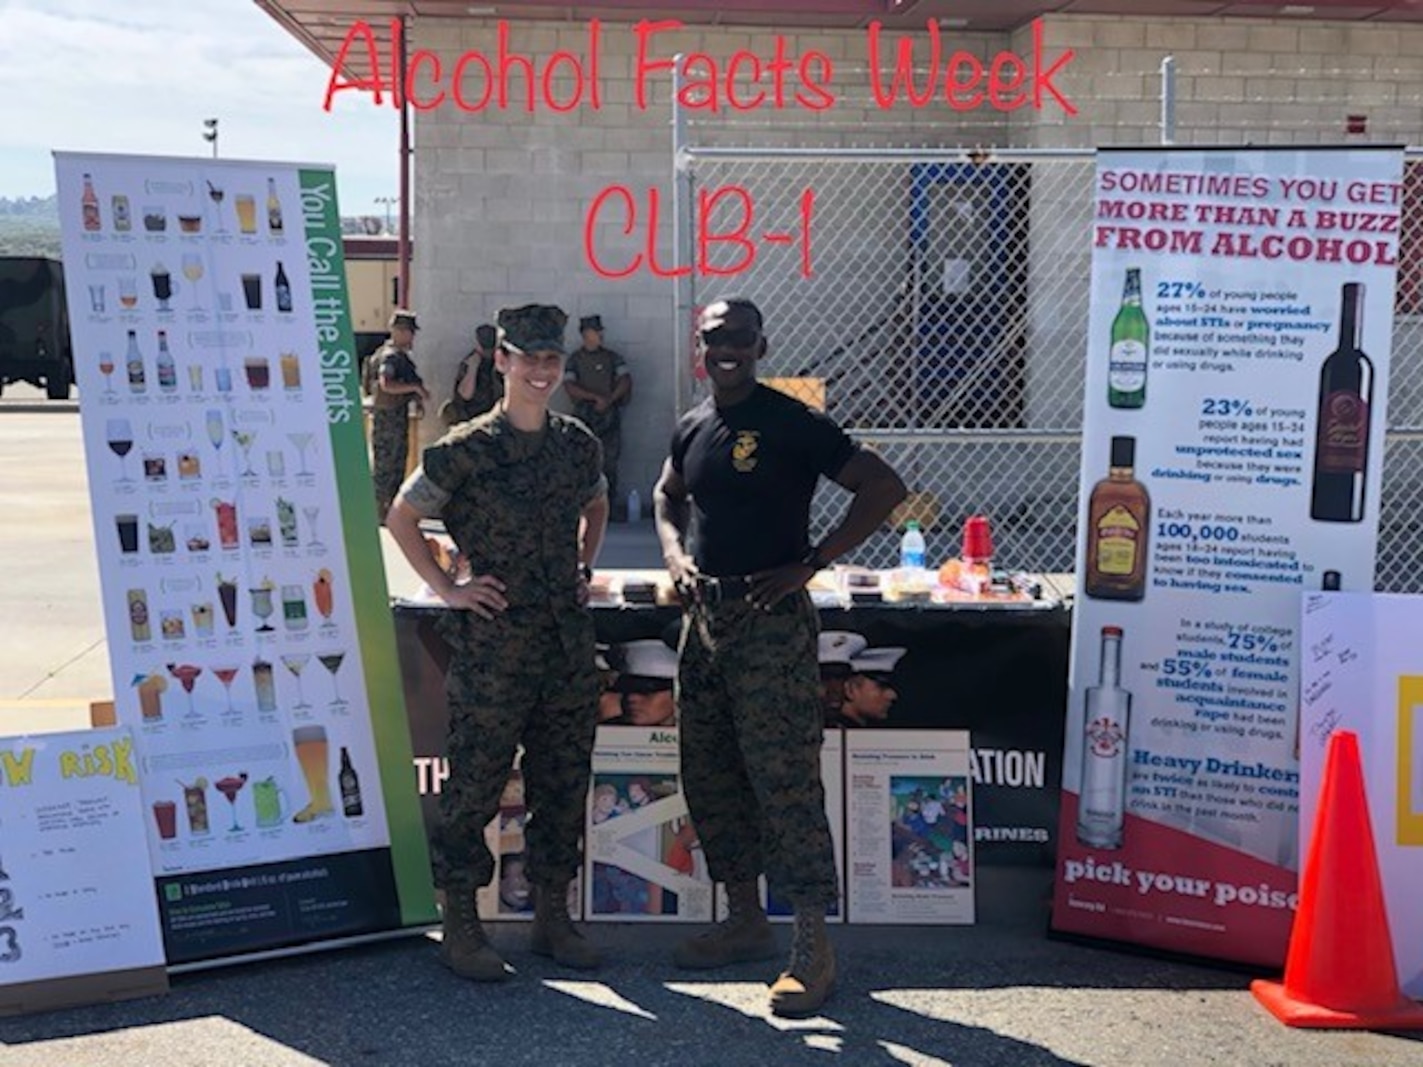 U.S. Marines with Combat Logistics Group 1, 1st Marine Logistics Group host Combat Logistics Battalion 1’s Alcohol Facts Week  from 1-5 Jun. 2020 in order to promote early intervention and resource awareness for preventing alcohol misuse.